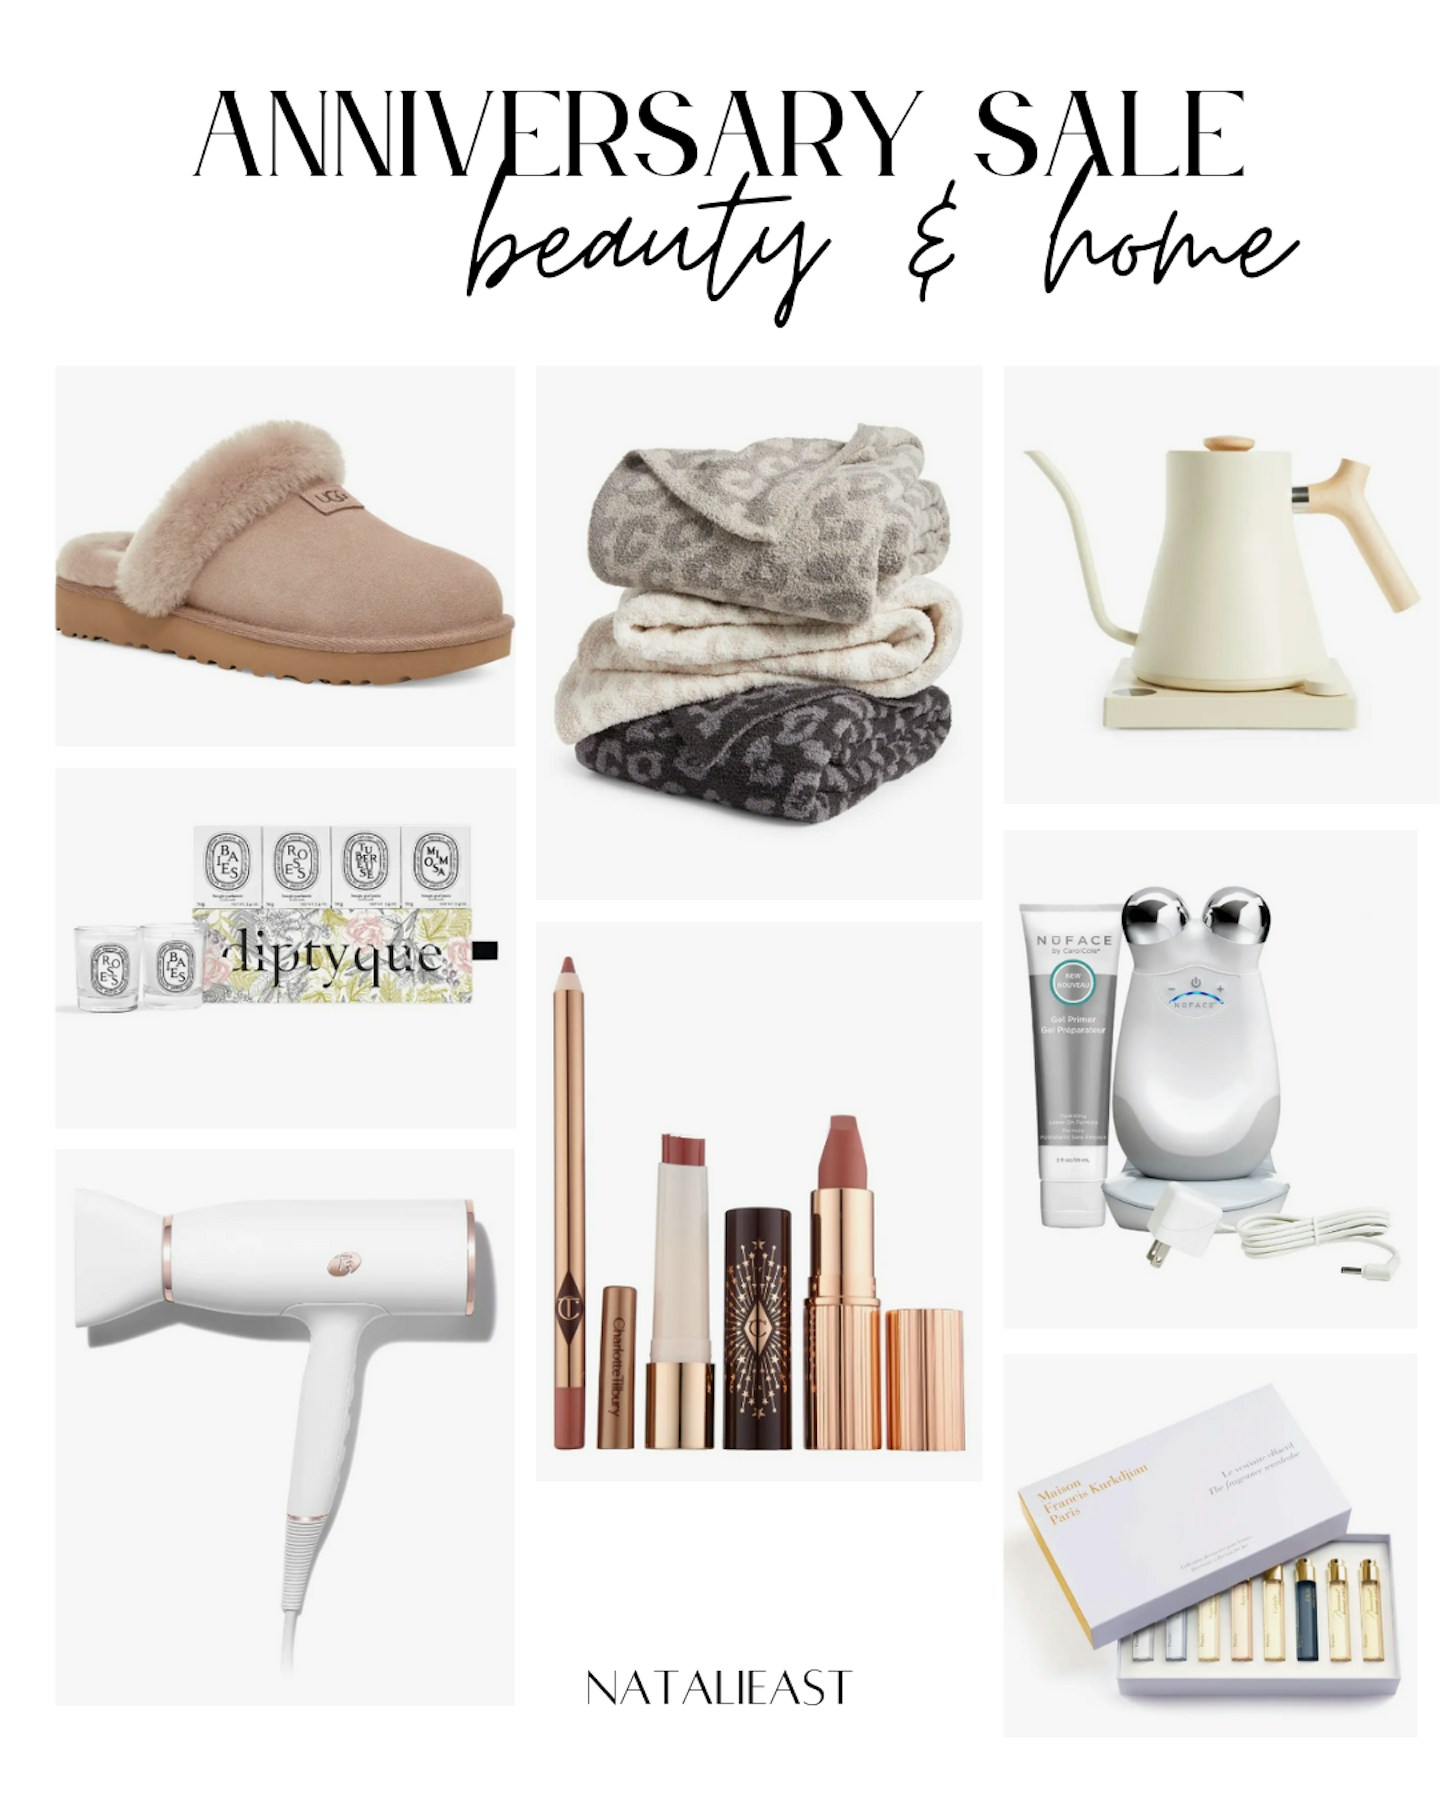 Nordstrom Anniversary Sale - Beauty and Home Finds on Sale!